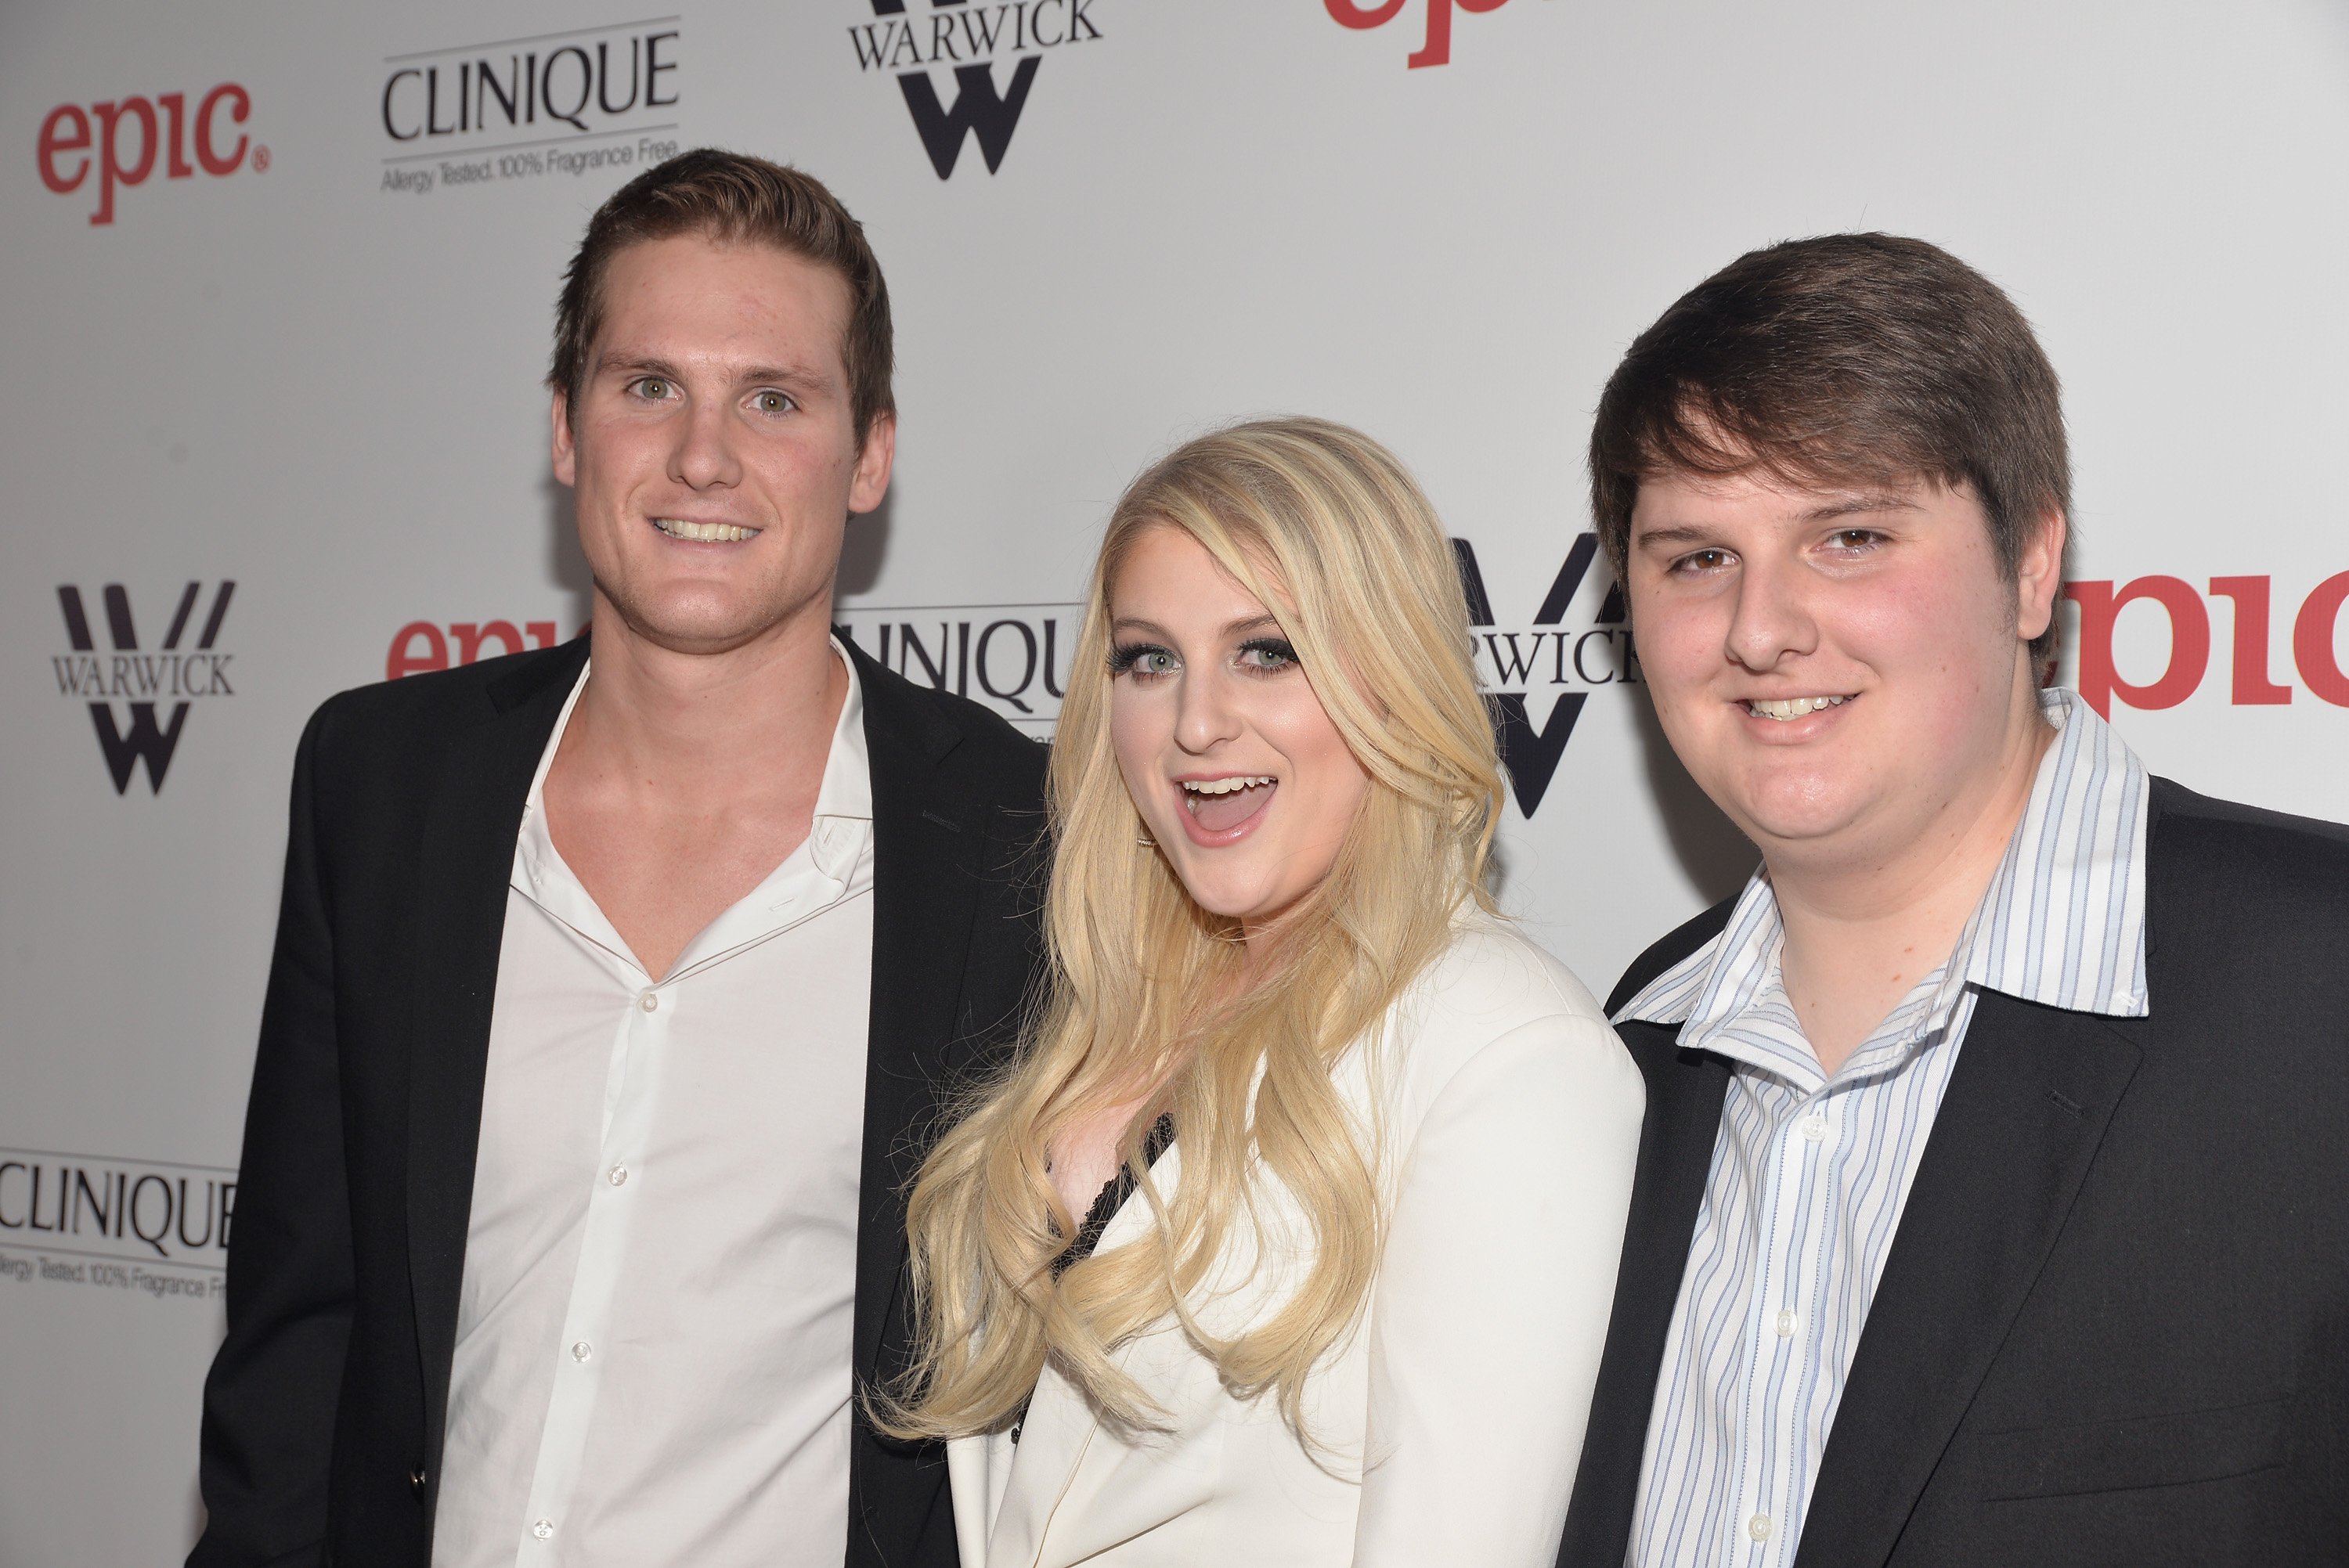 Singer/songwriter Meghan Trainor attends the release party for her debut album "Title" with brothers Ryan Trainor (L) and Justin Trainor (R) at Warwick on January 13, 2015, in Hollywood, California. | Source: Getty Images